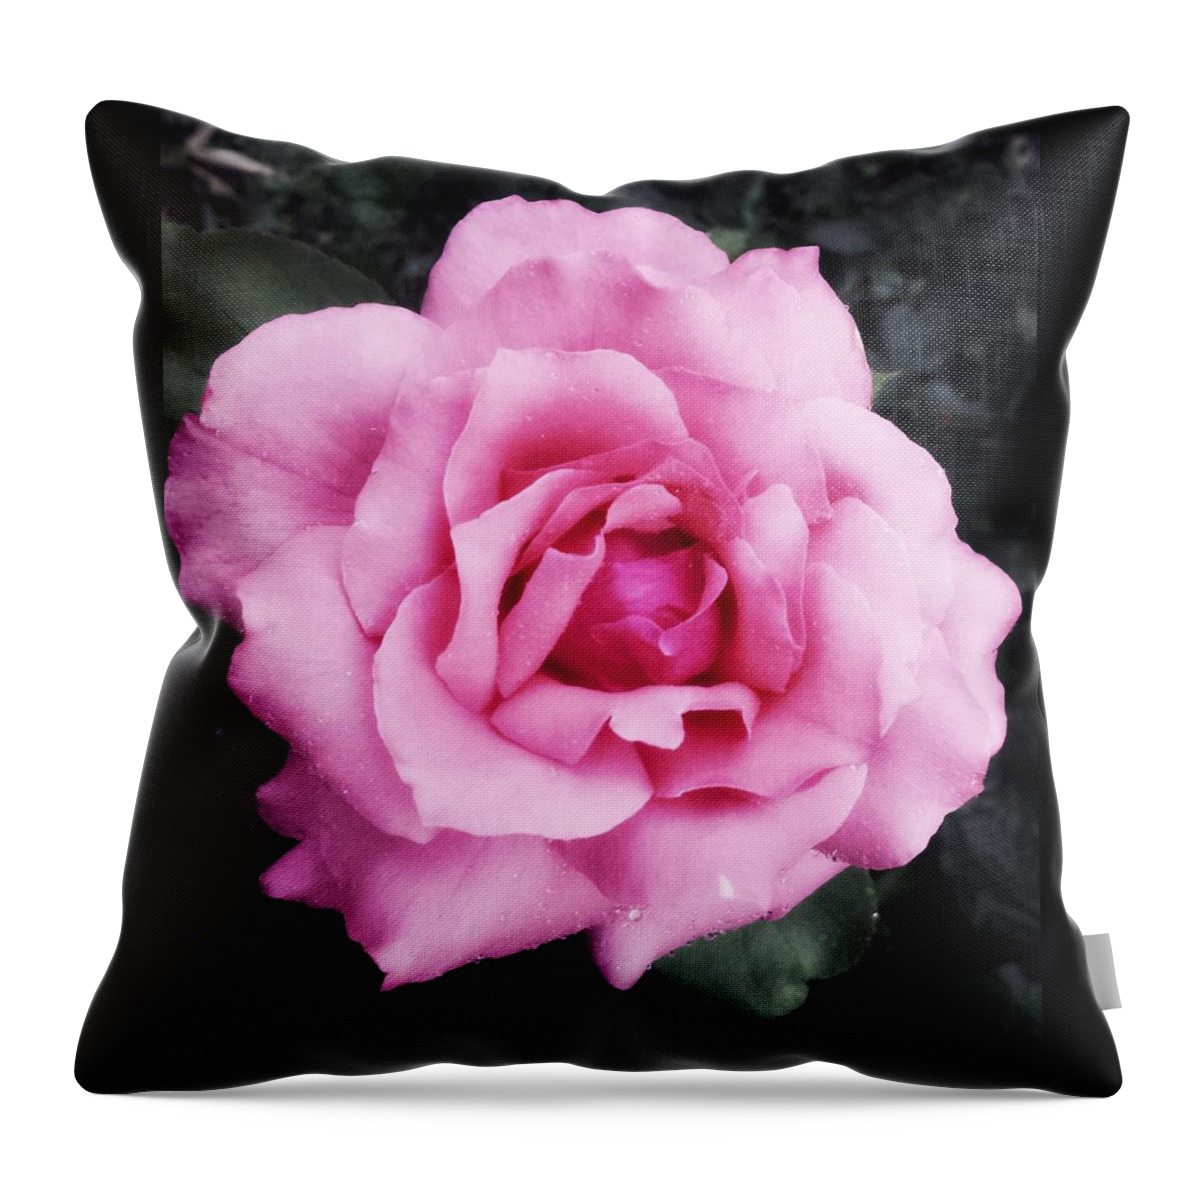 Pink Throw Pillow featuring the photograph Rose by Tanja Leuenberger